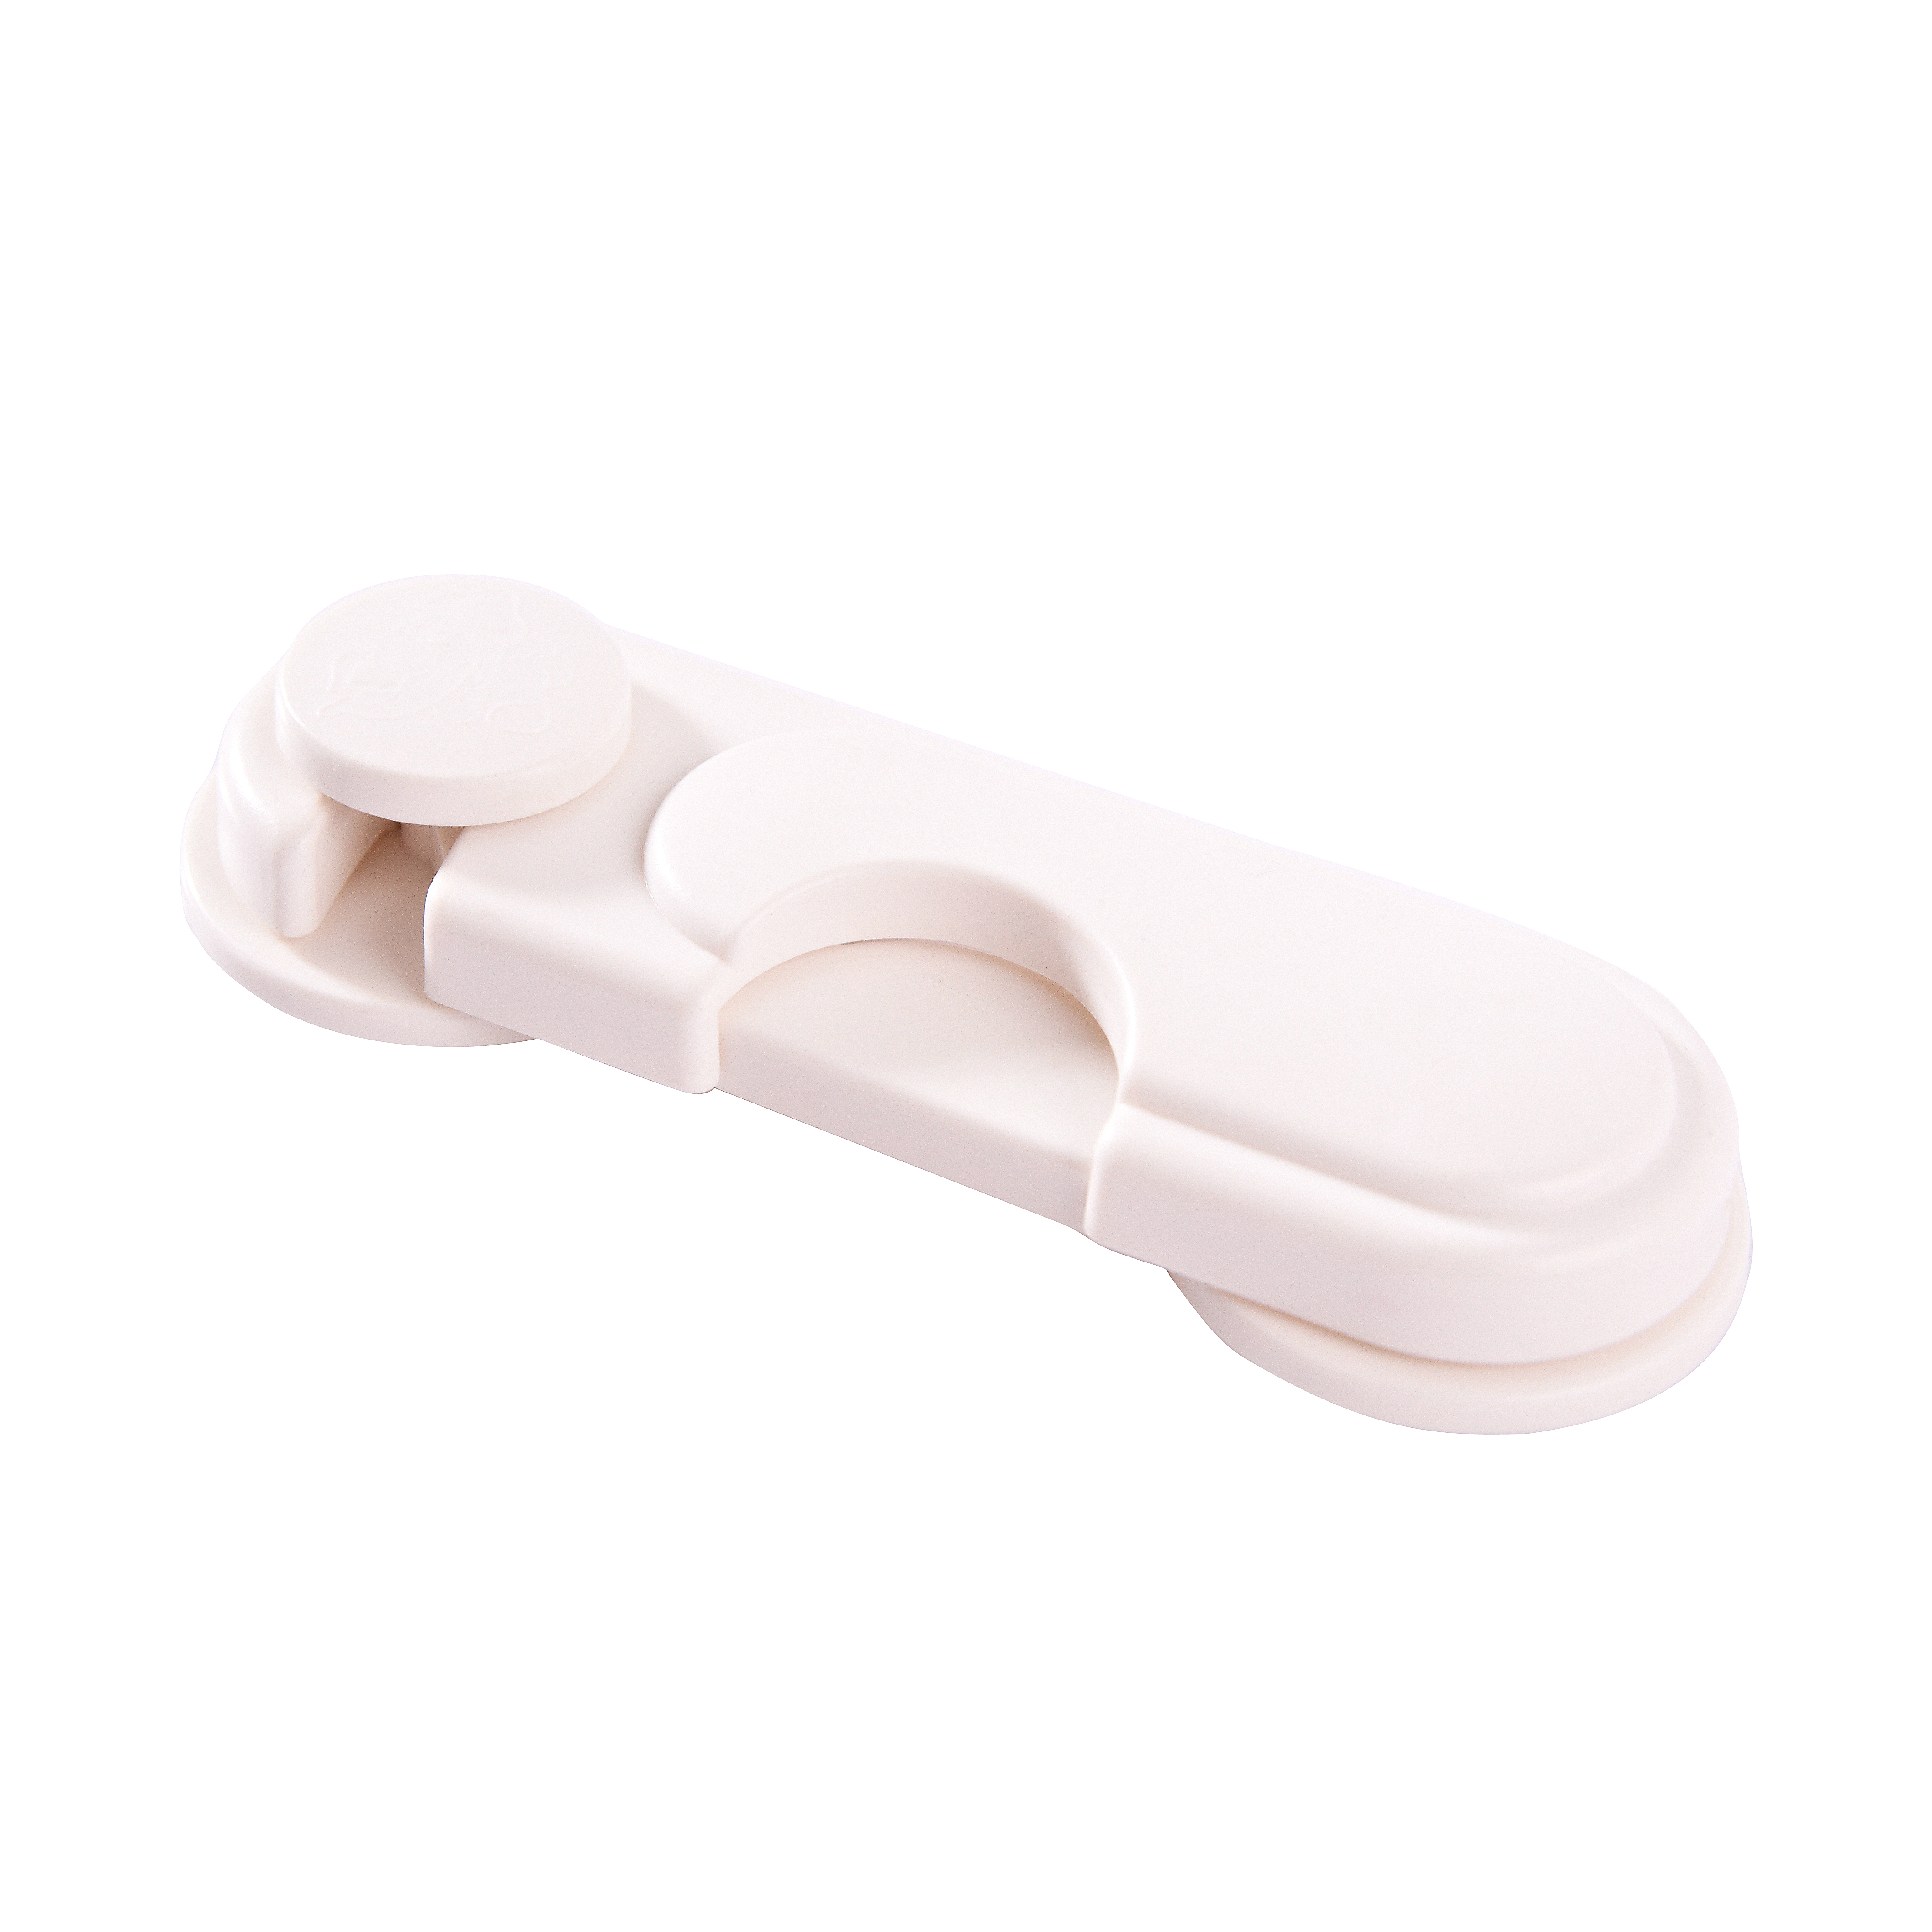 Kids Safety Products Plastic Drawer Baby Safety Lock